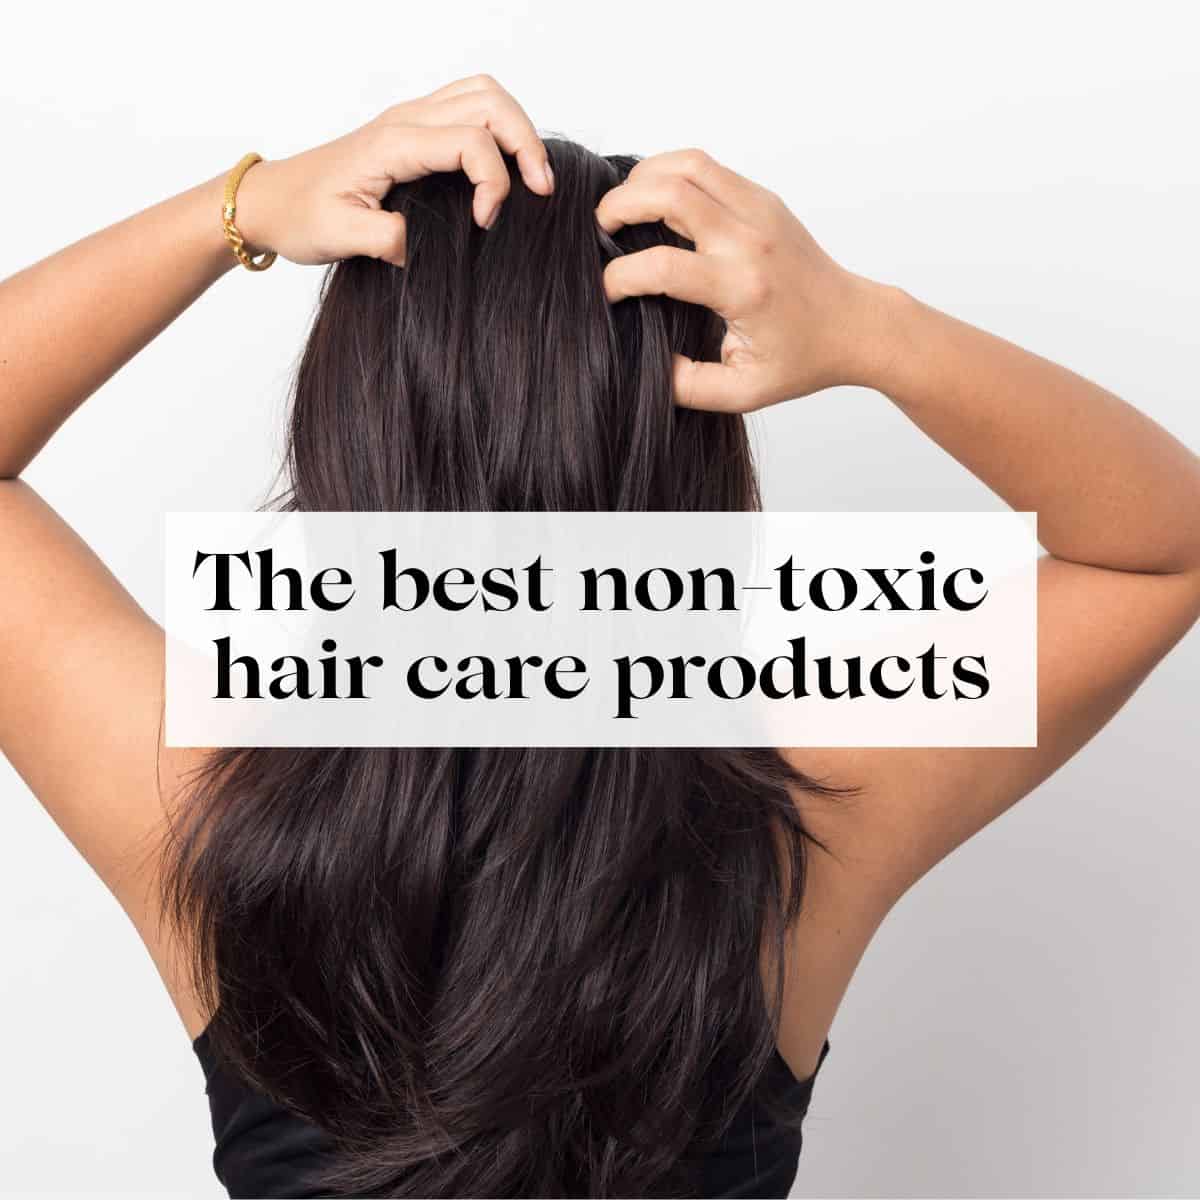 A woman scrubbing her hair with the title "The best non-toxic hair care products" over her.